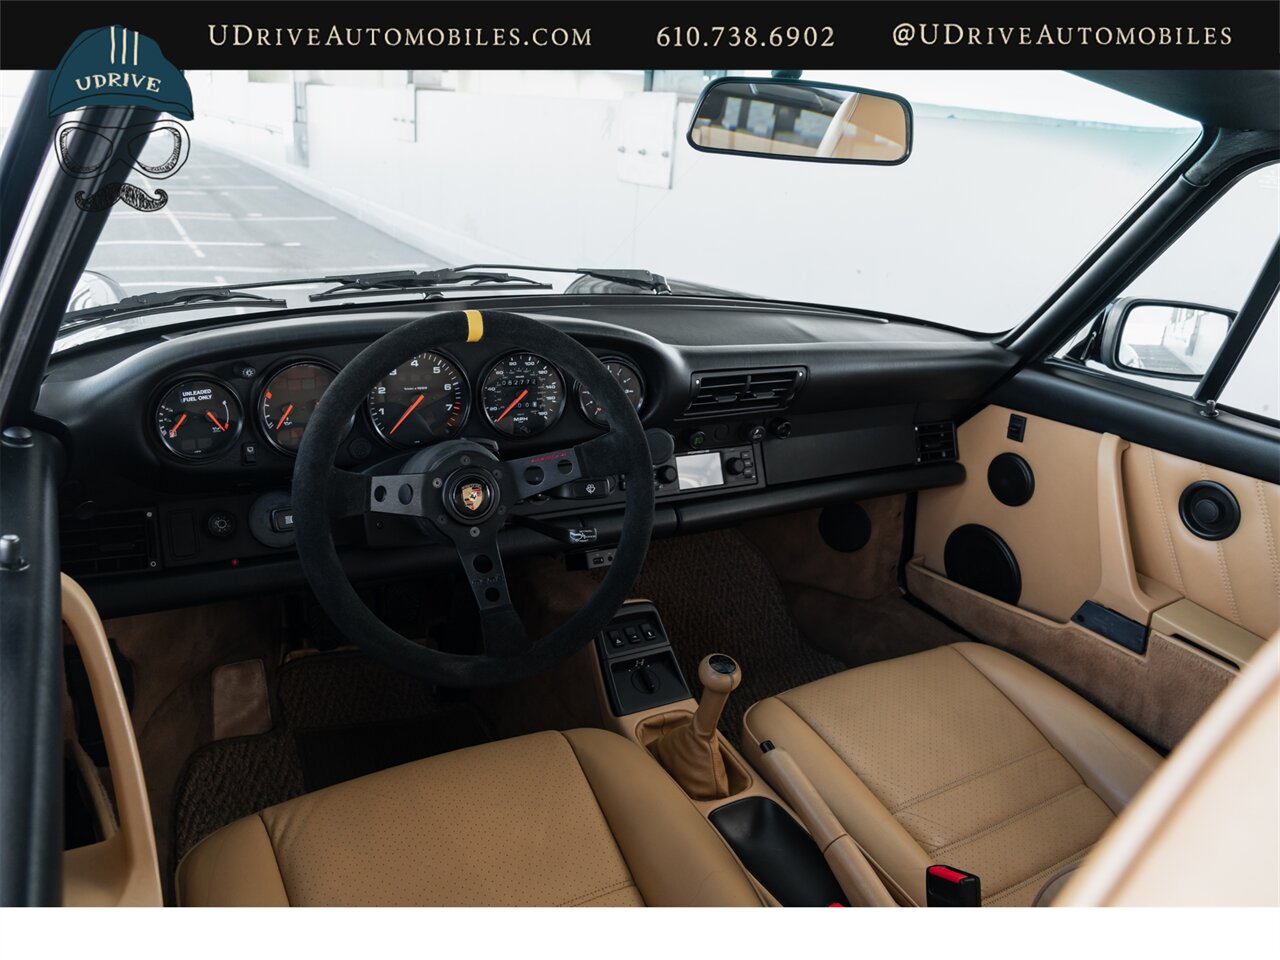 1989 Porsche 911 Carrera 4  964 C4 5 Speed Manual $63k Recent Service and Upgrades - Photo 33 - West Chester, PA 19382